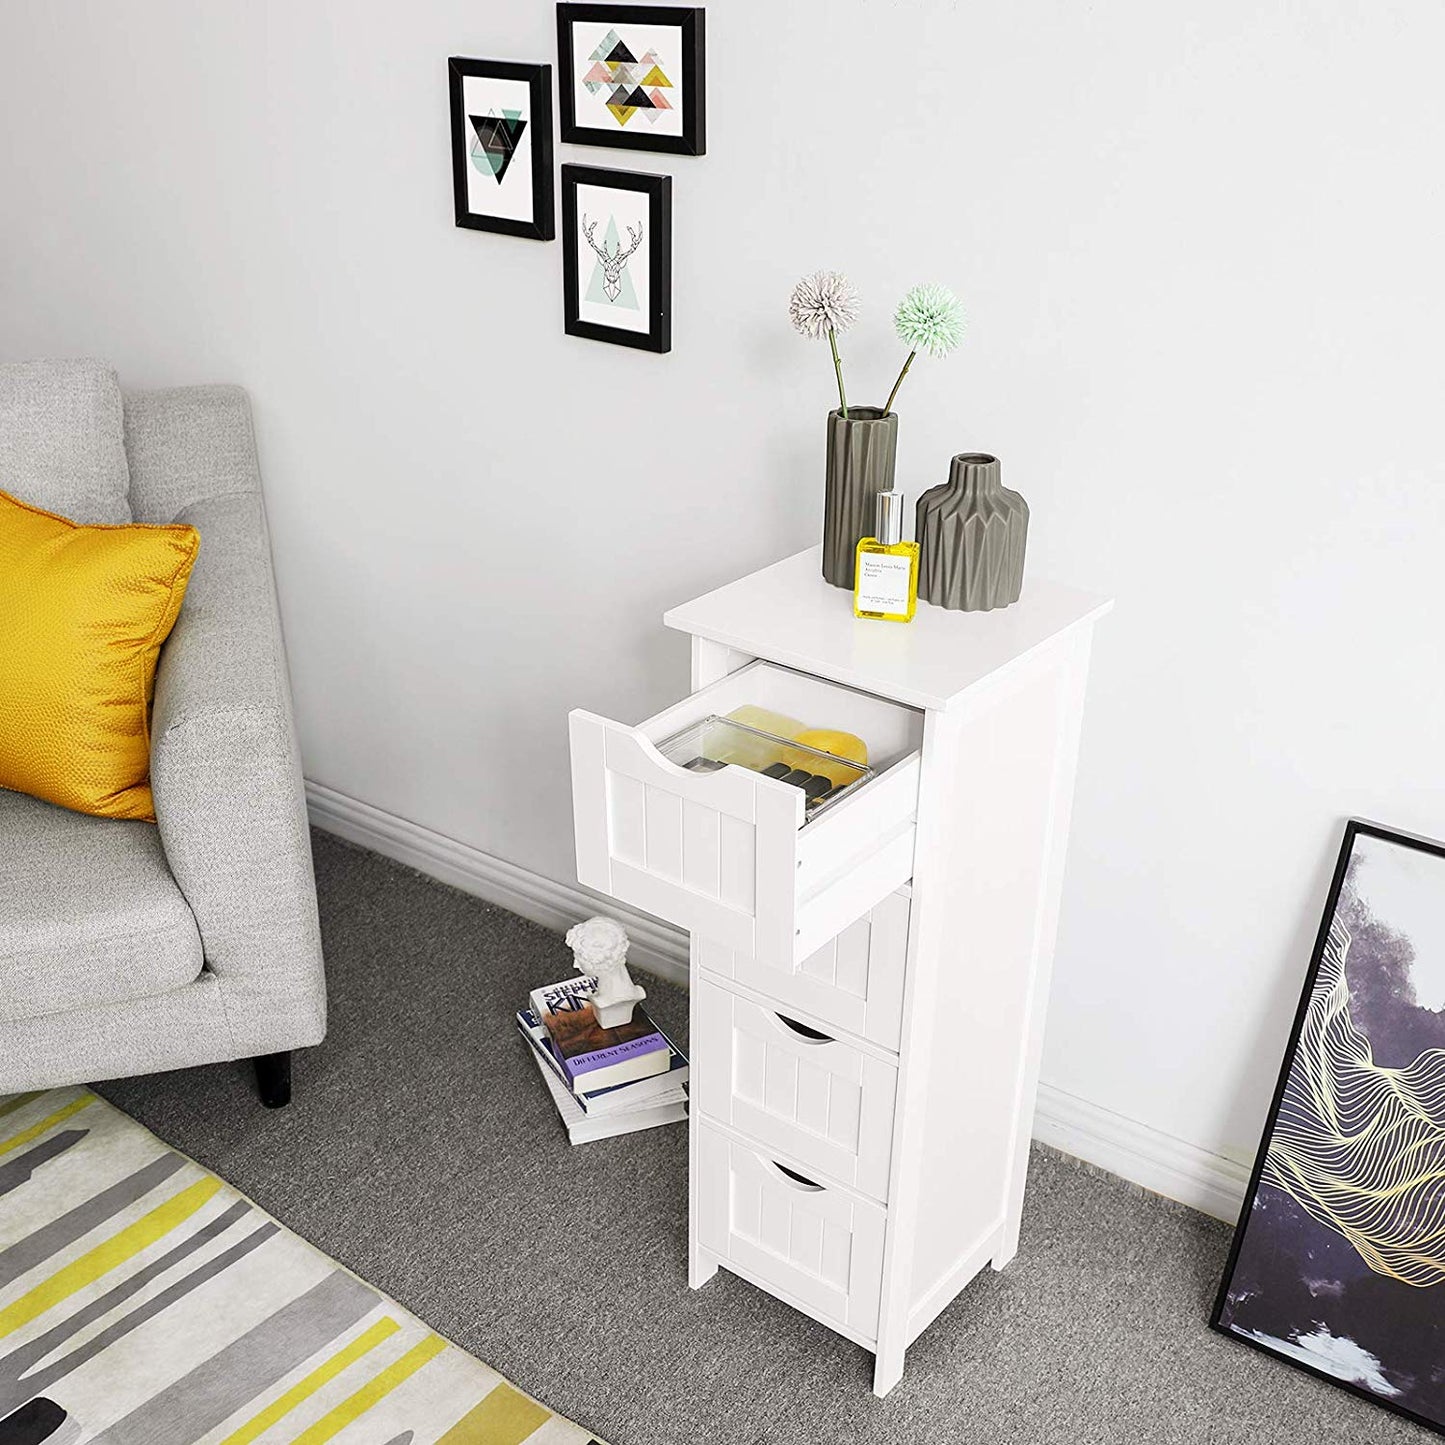 Freestanding Storage Cabinet with Drawers, White